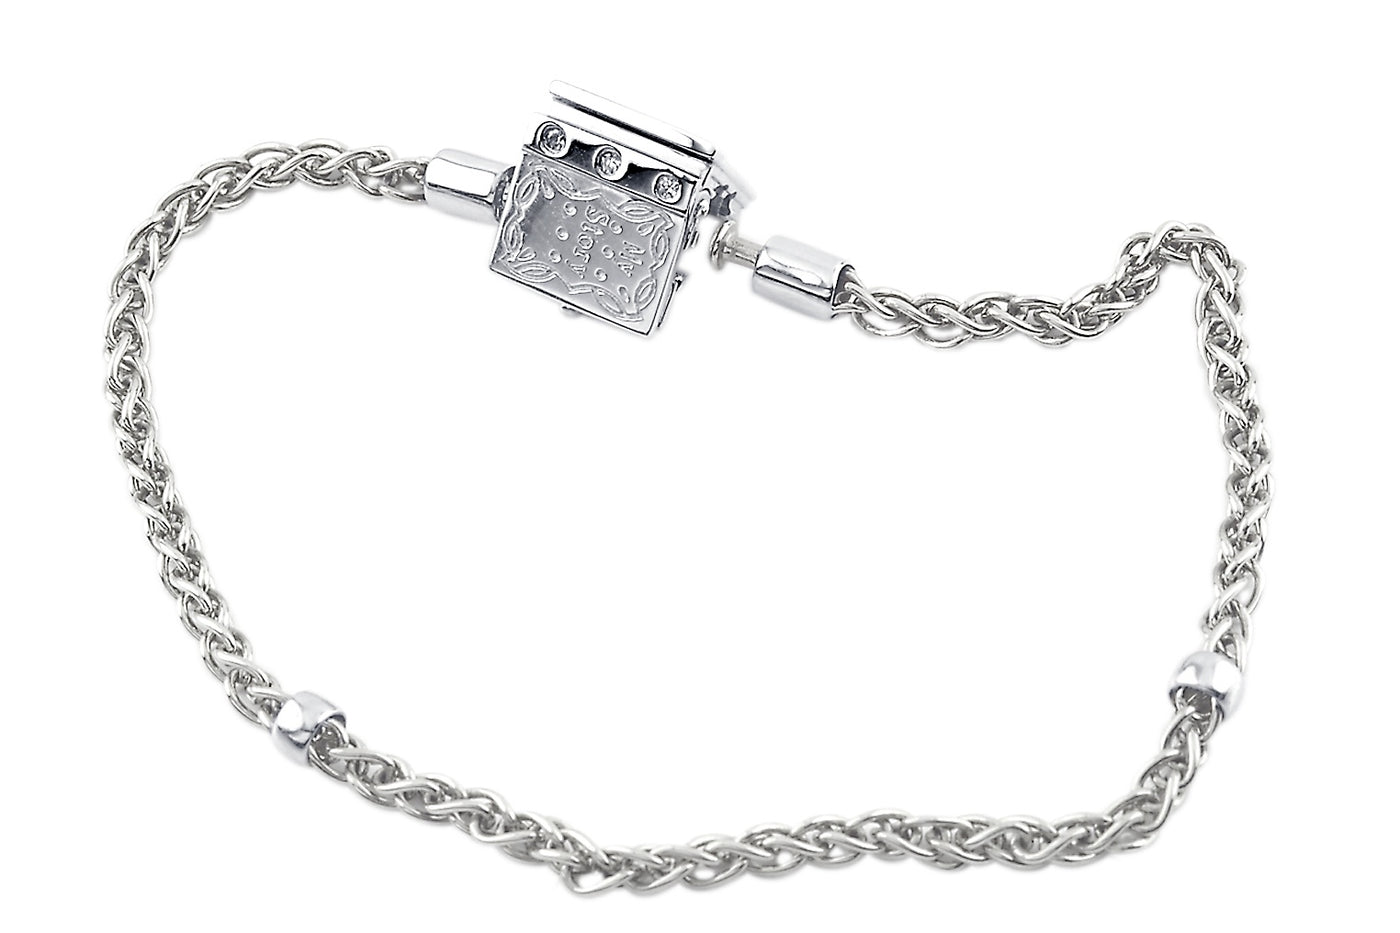 8.25" Bracelet WG - 14K White Gold with Stopper Beads and Storywheel Book Clasp with Diamonds